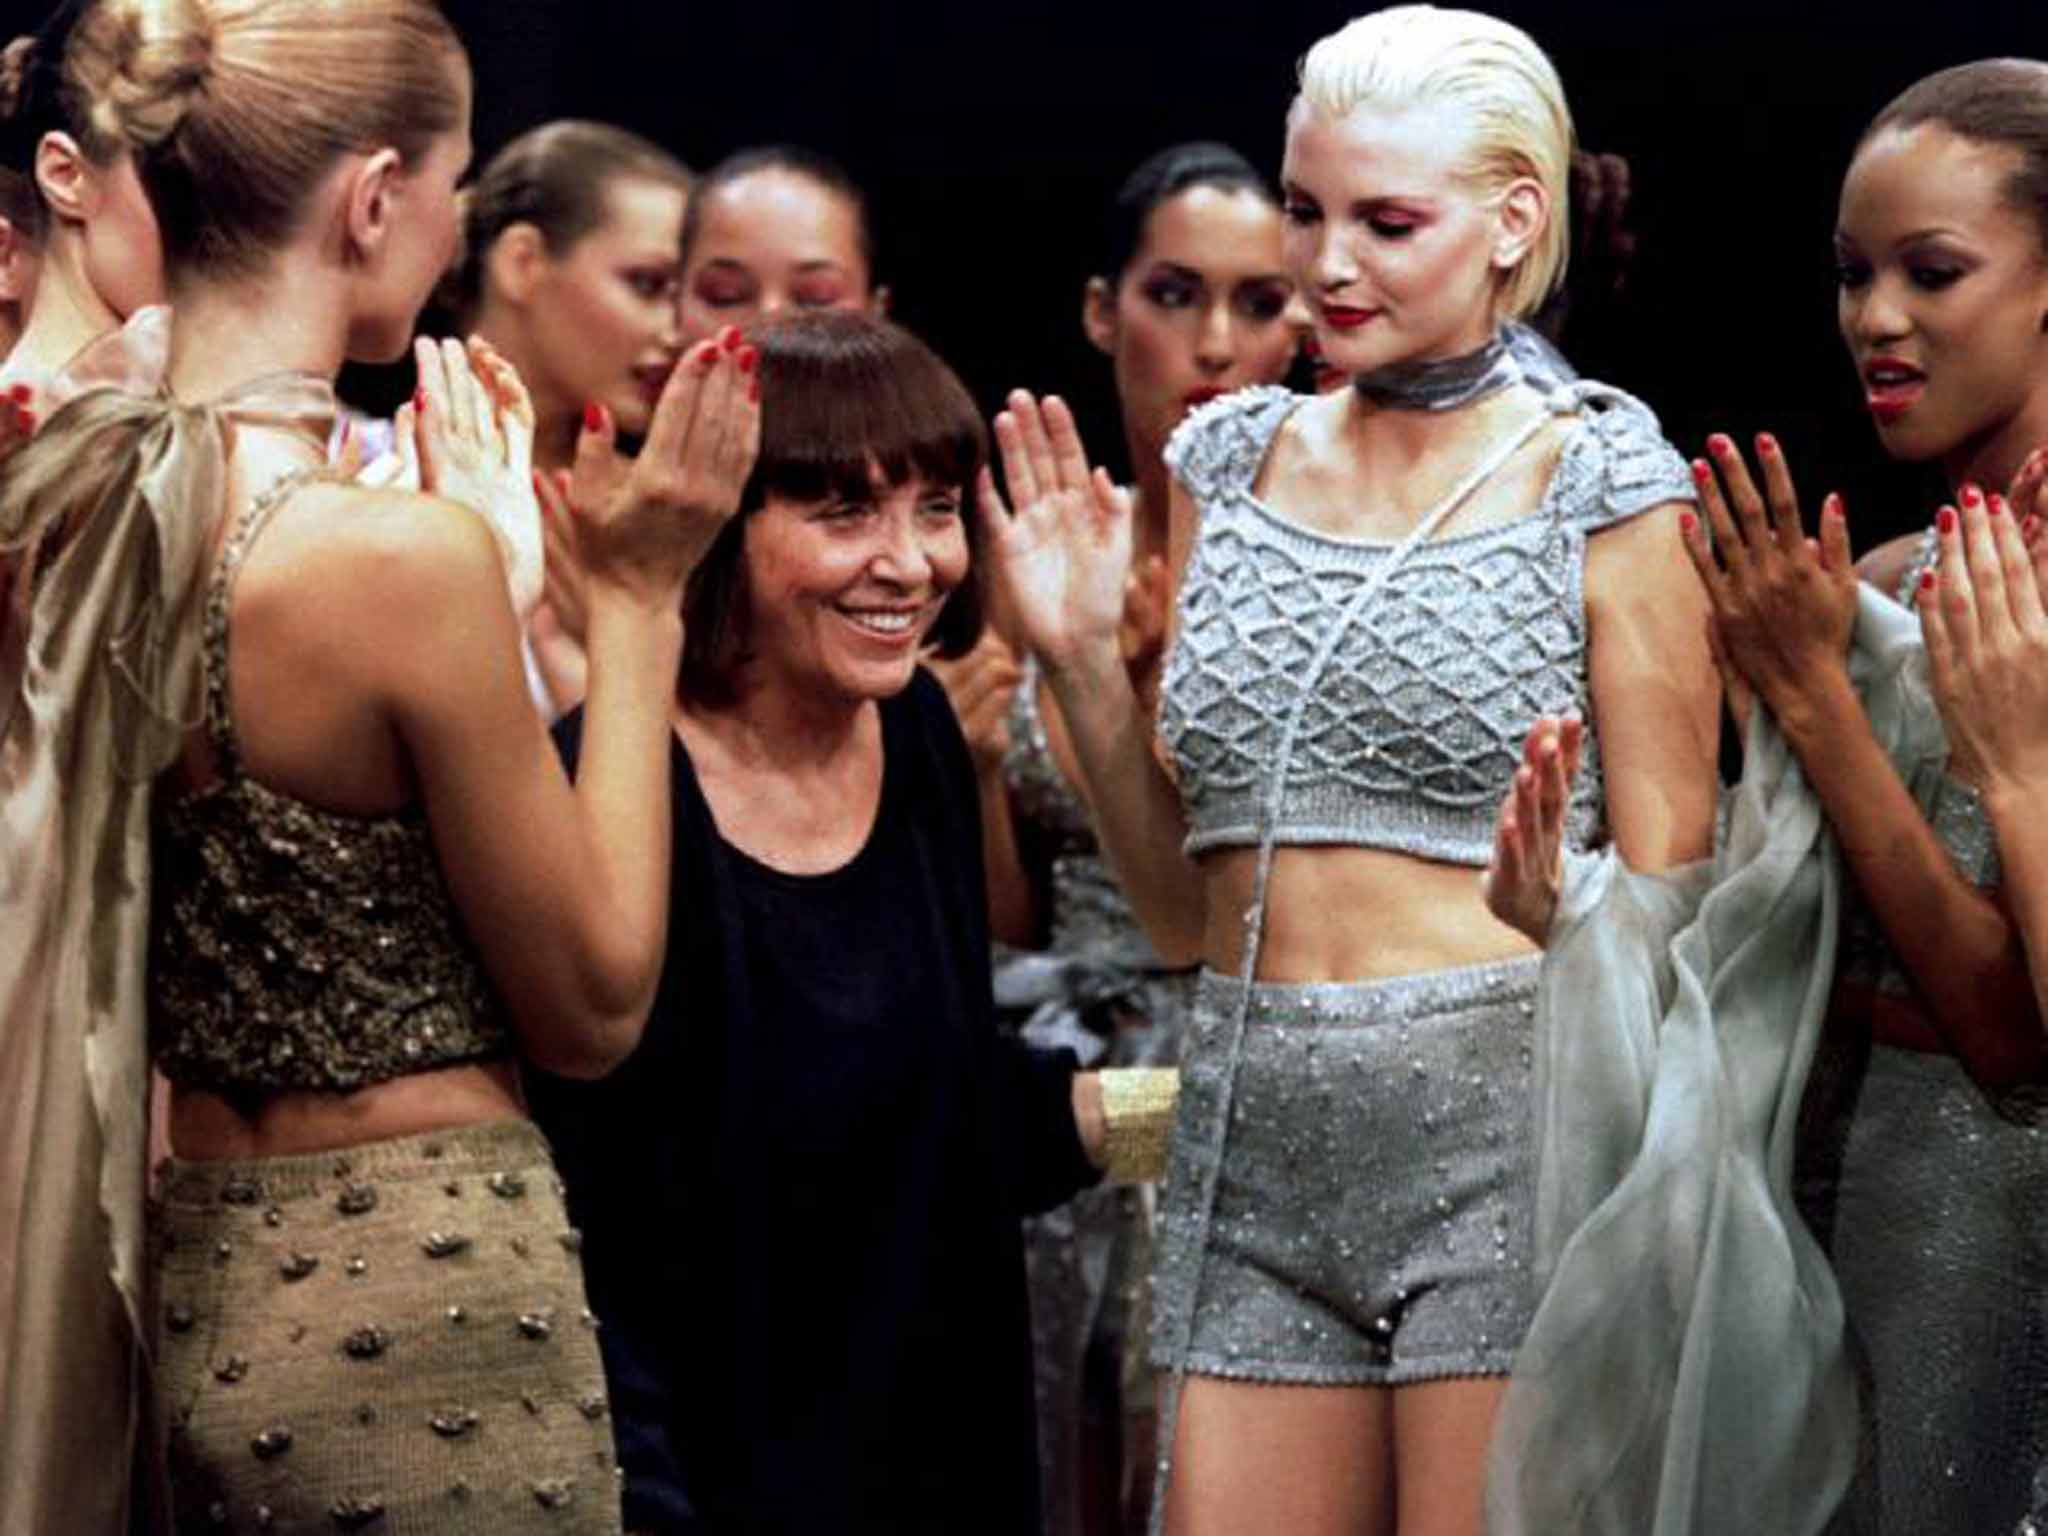 Mandelli basks in the applause ofher models on the catwalk in Milan in 1995